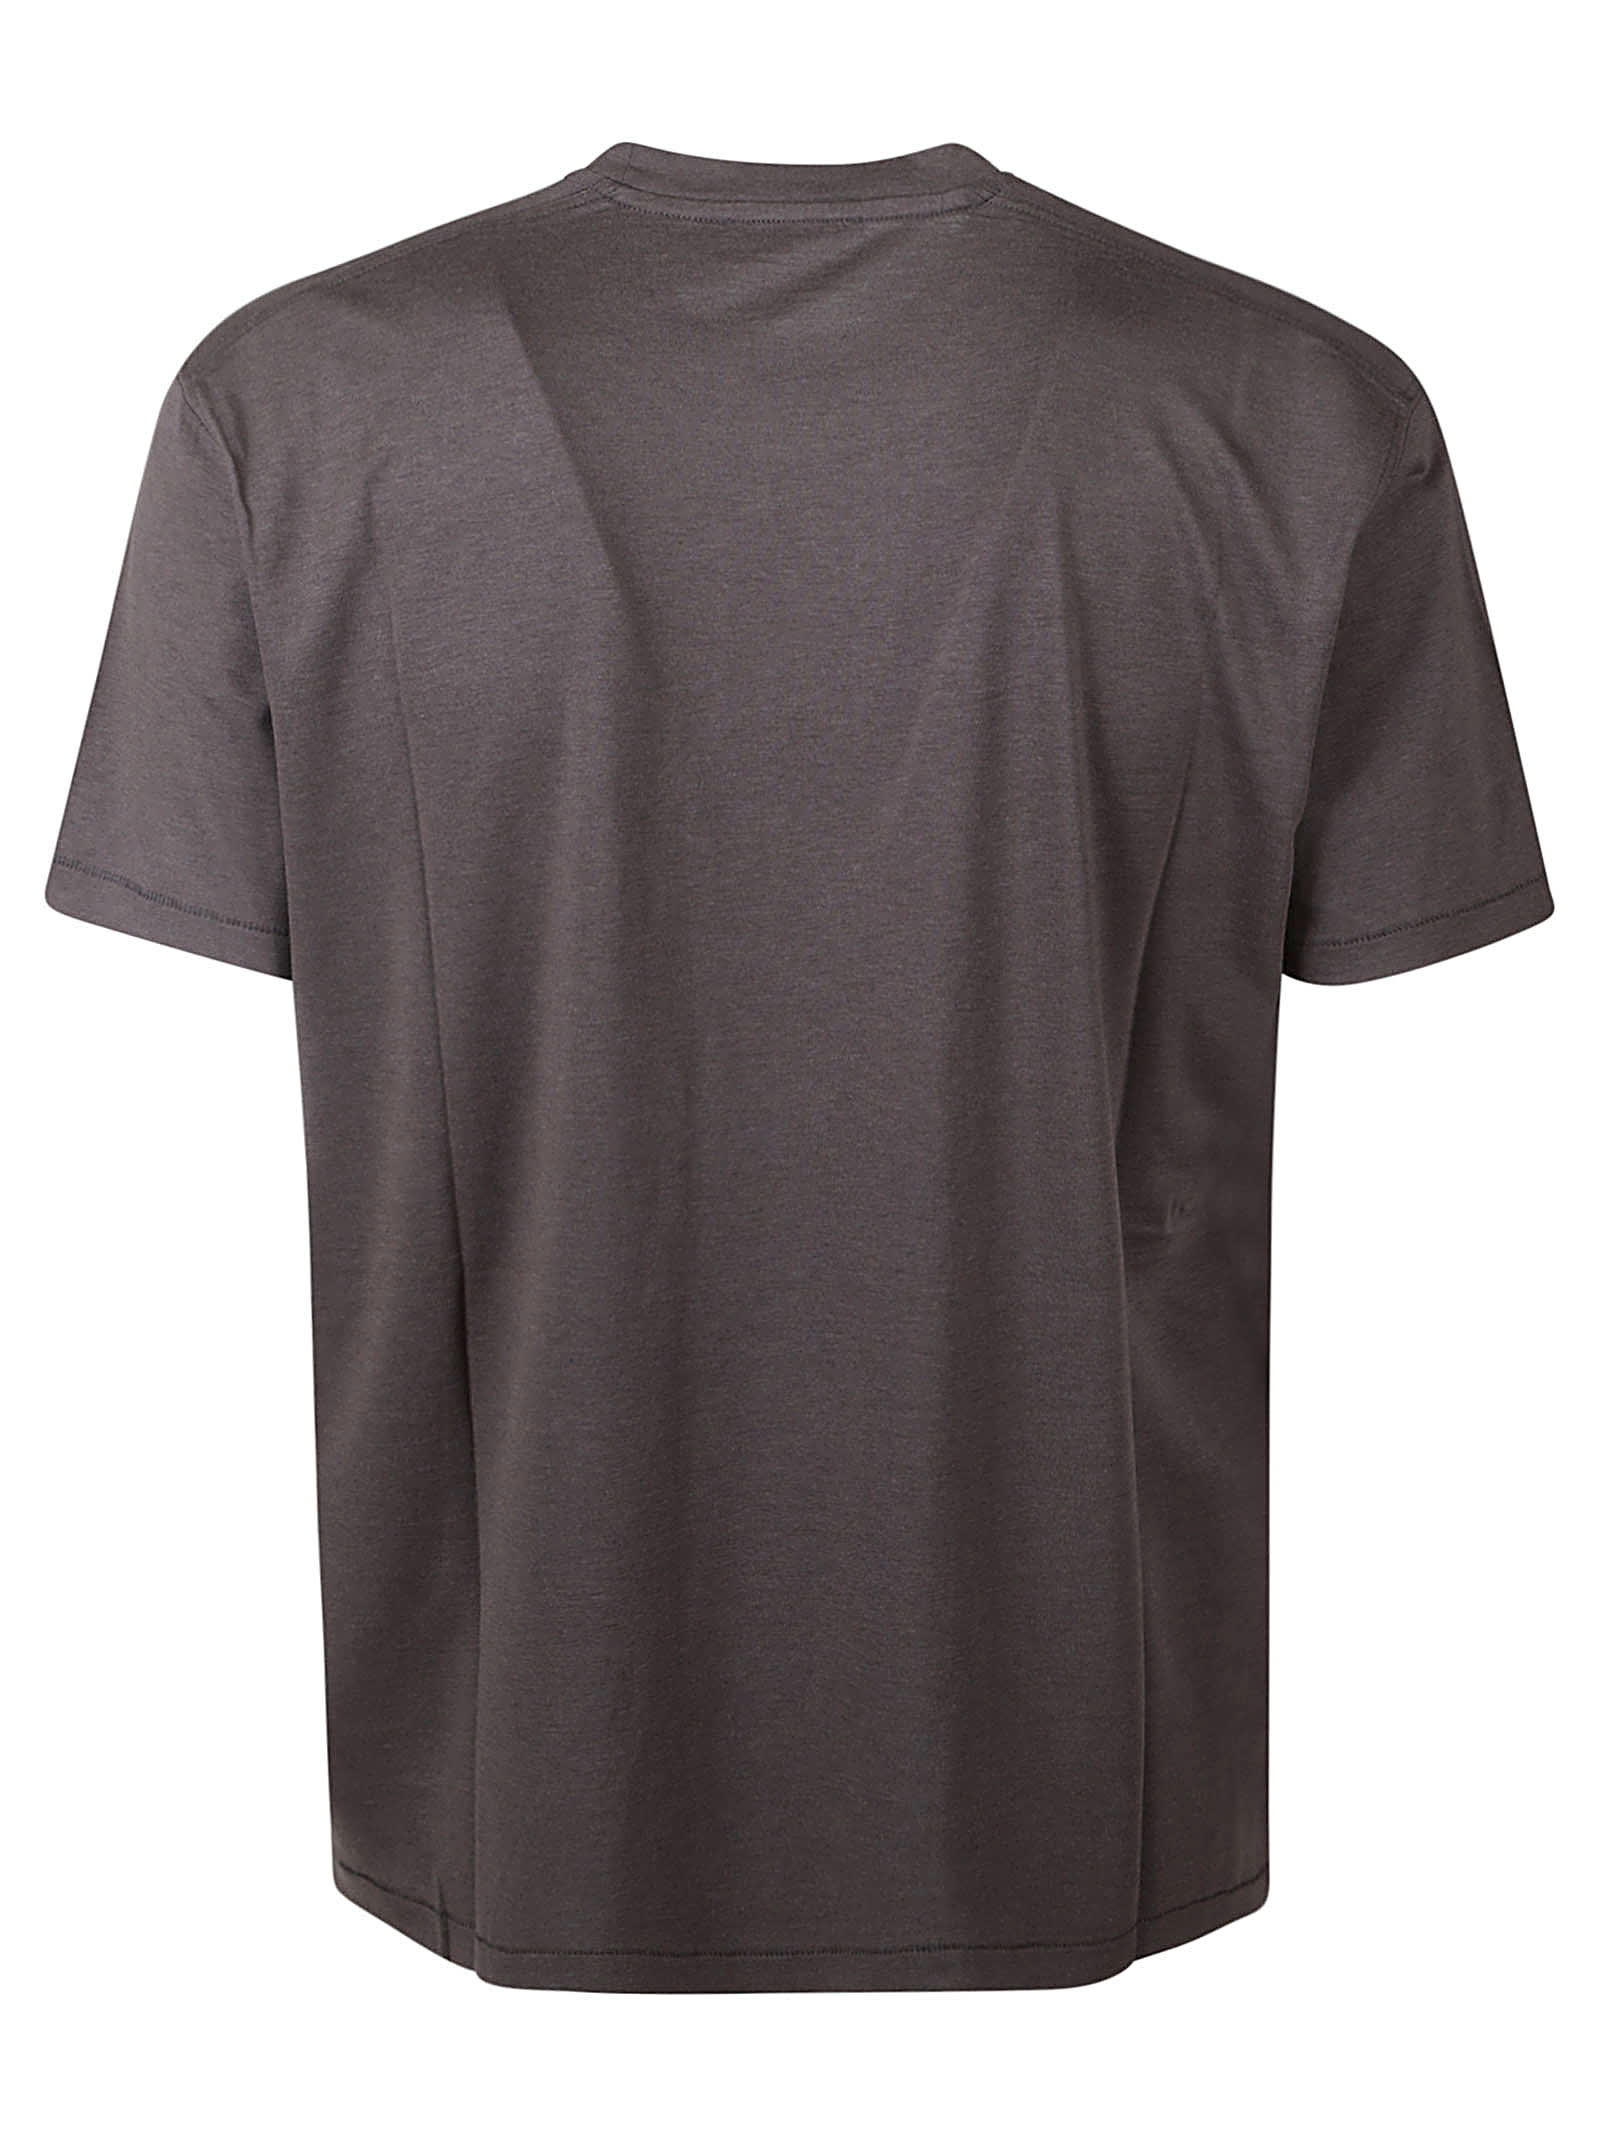 Shop Tom Ford Round Neck T-shirt In Anthracite